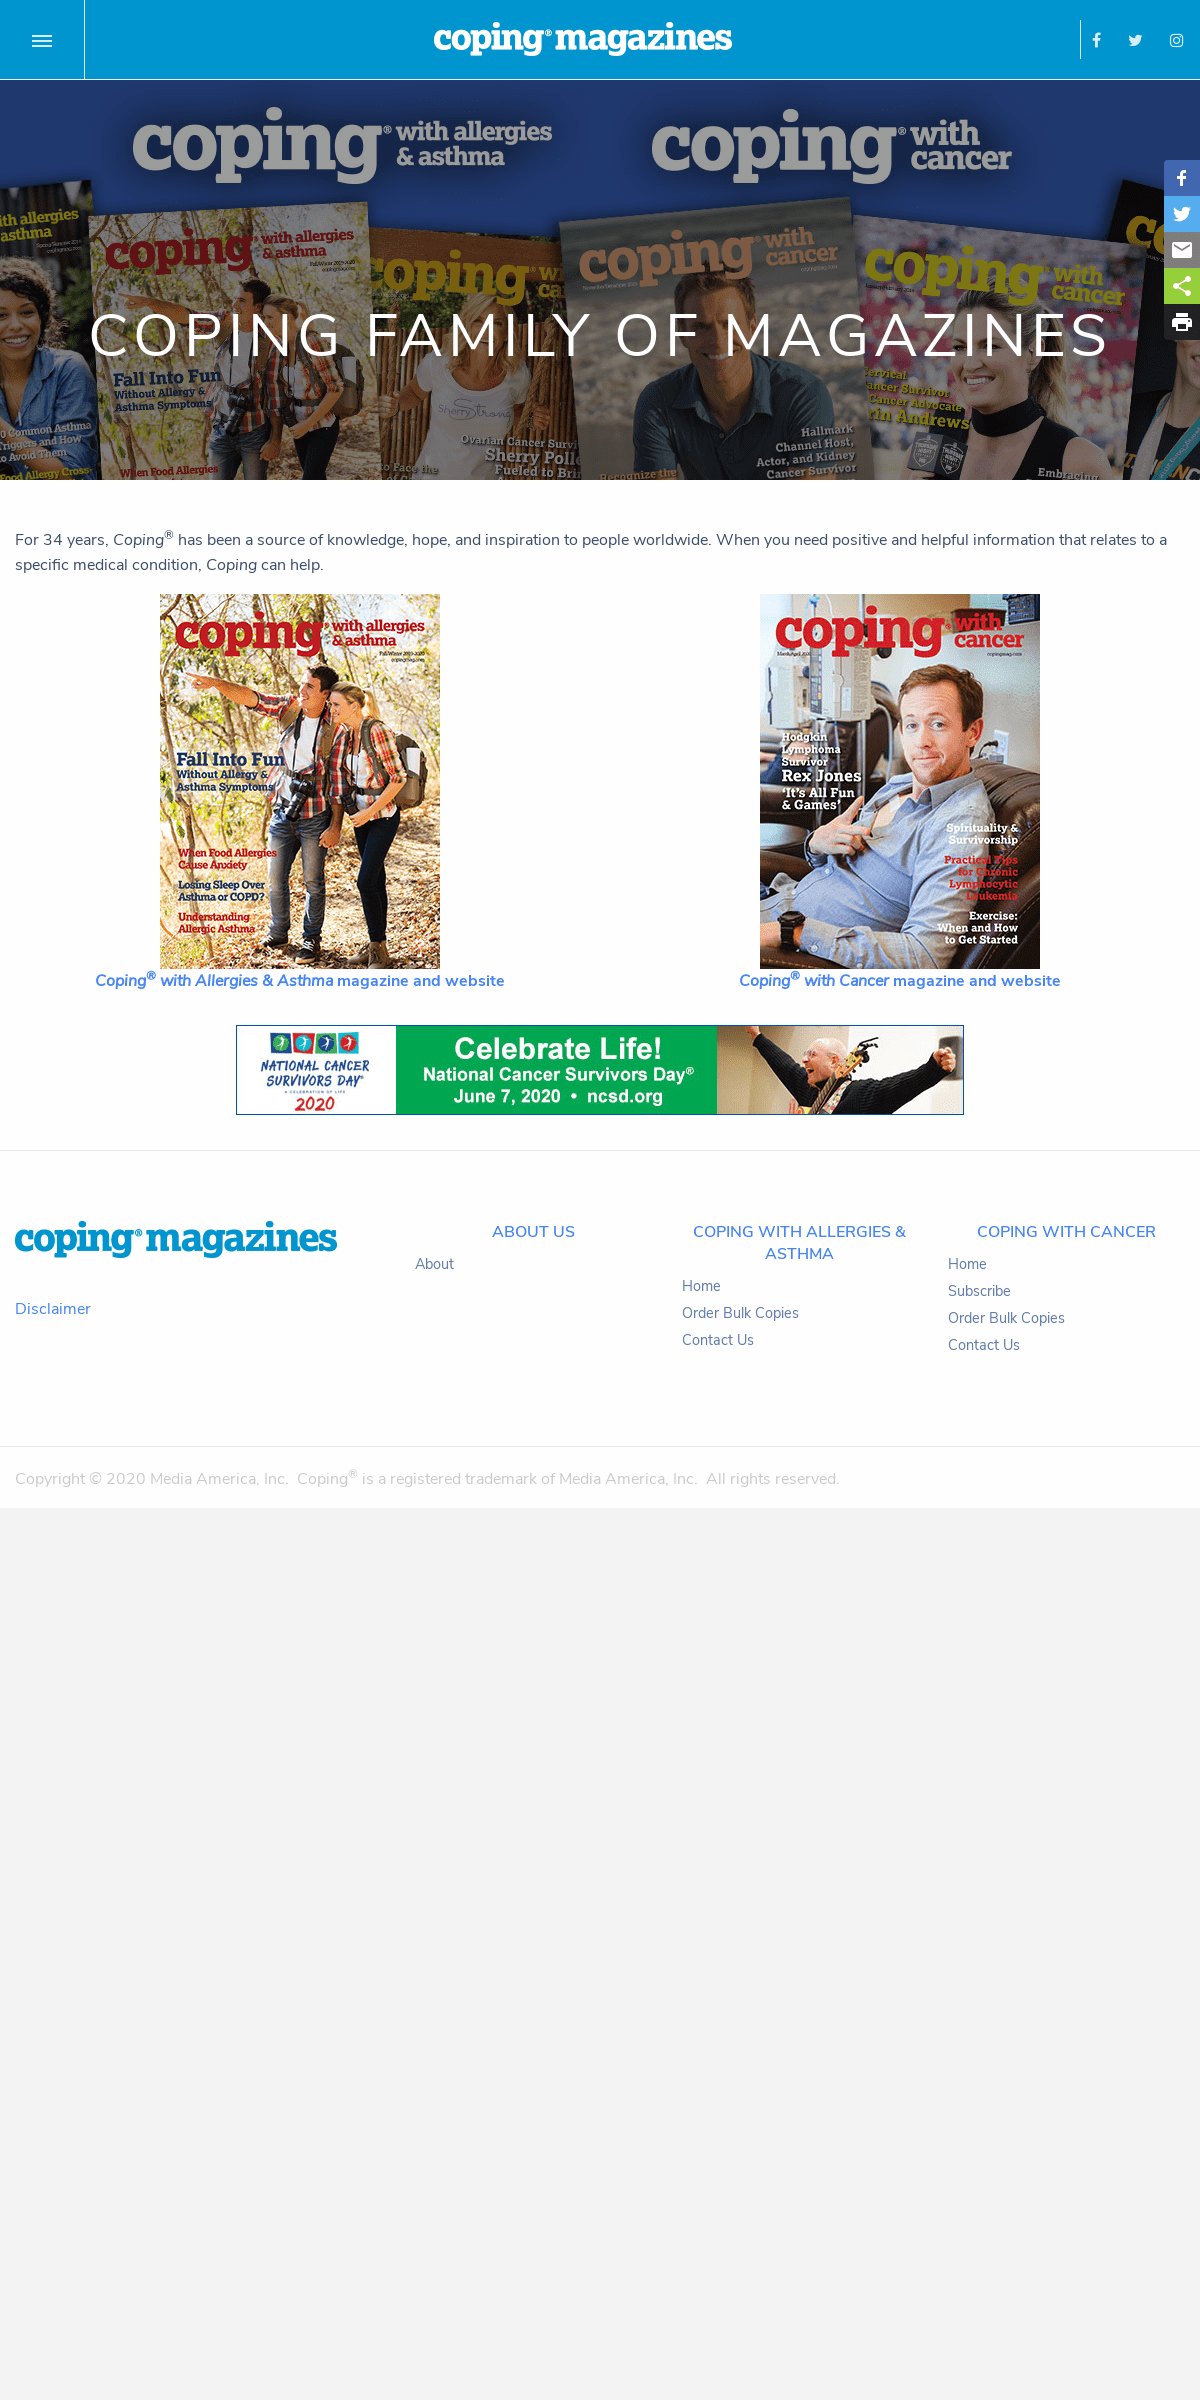 A complete backup of copingmag.com